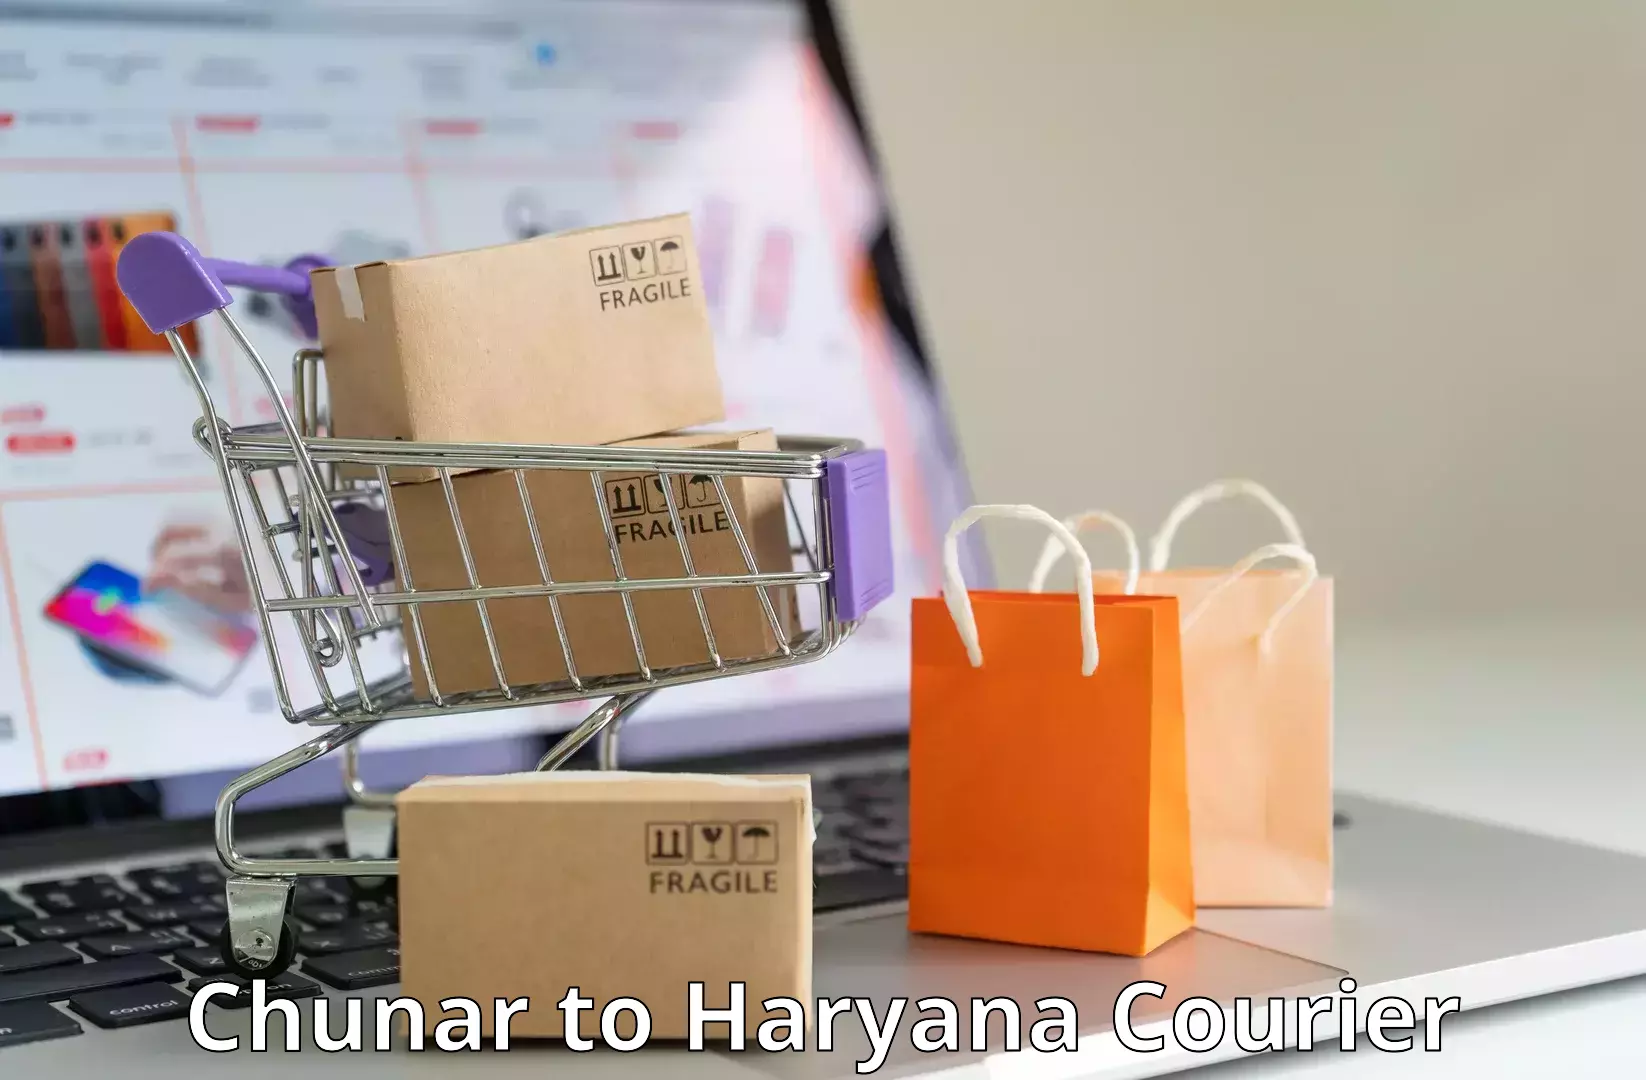 Courier service innovation in Chunar to Dharuhera